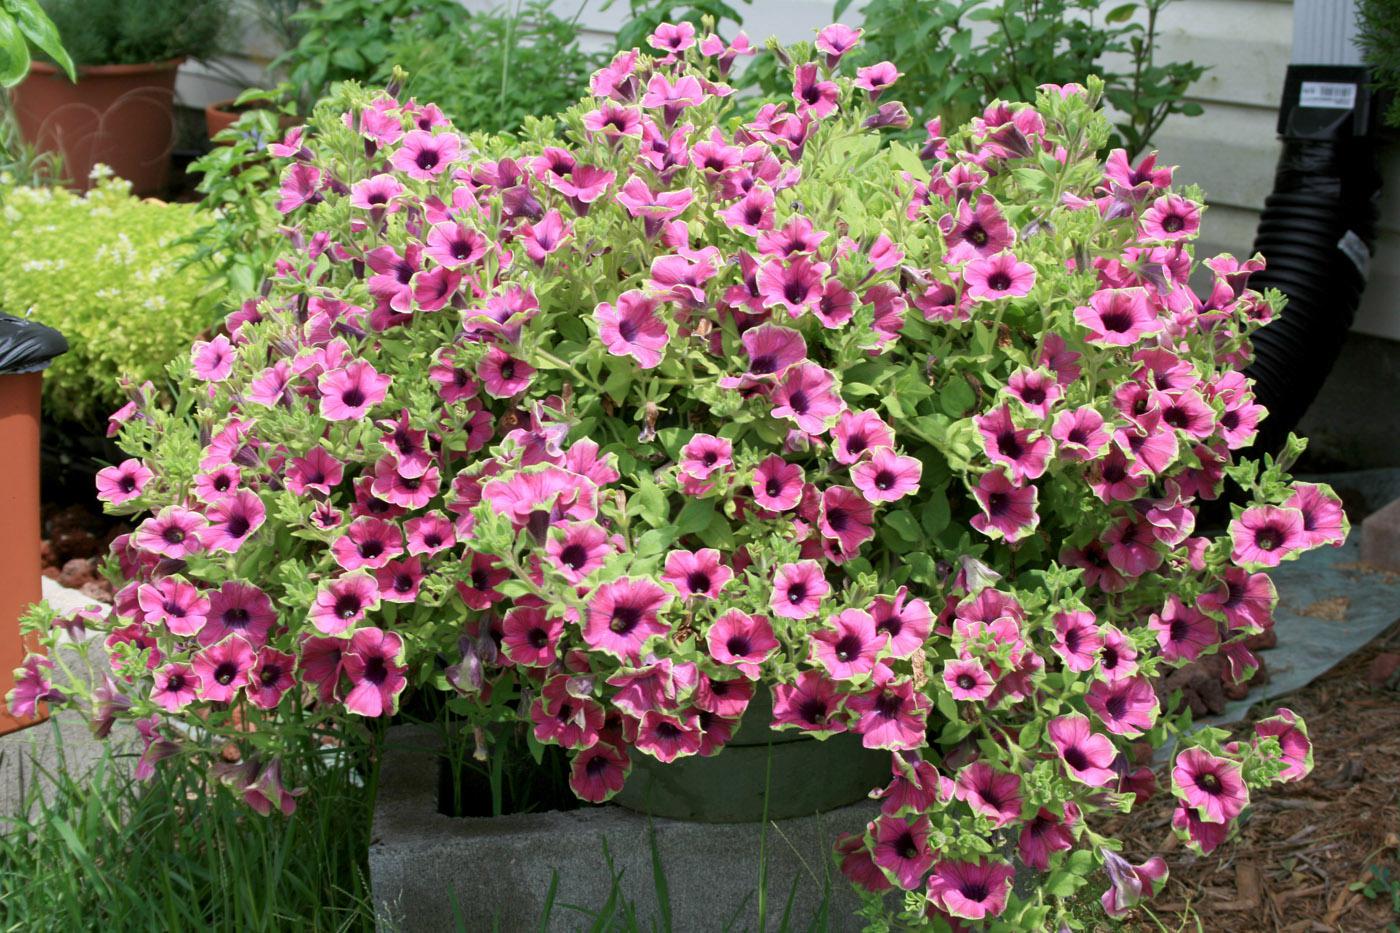 This Pretty Much Picasso petunia looks great because it is growing in high-quality potting mix. (Photo by Gary Bachman)